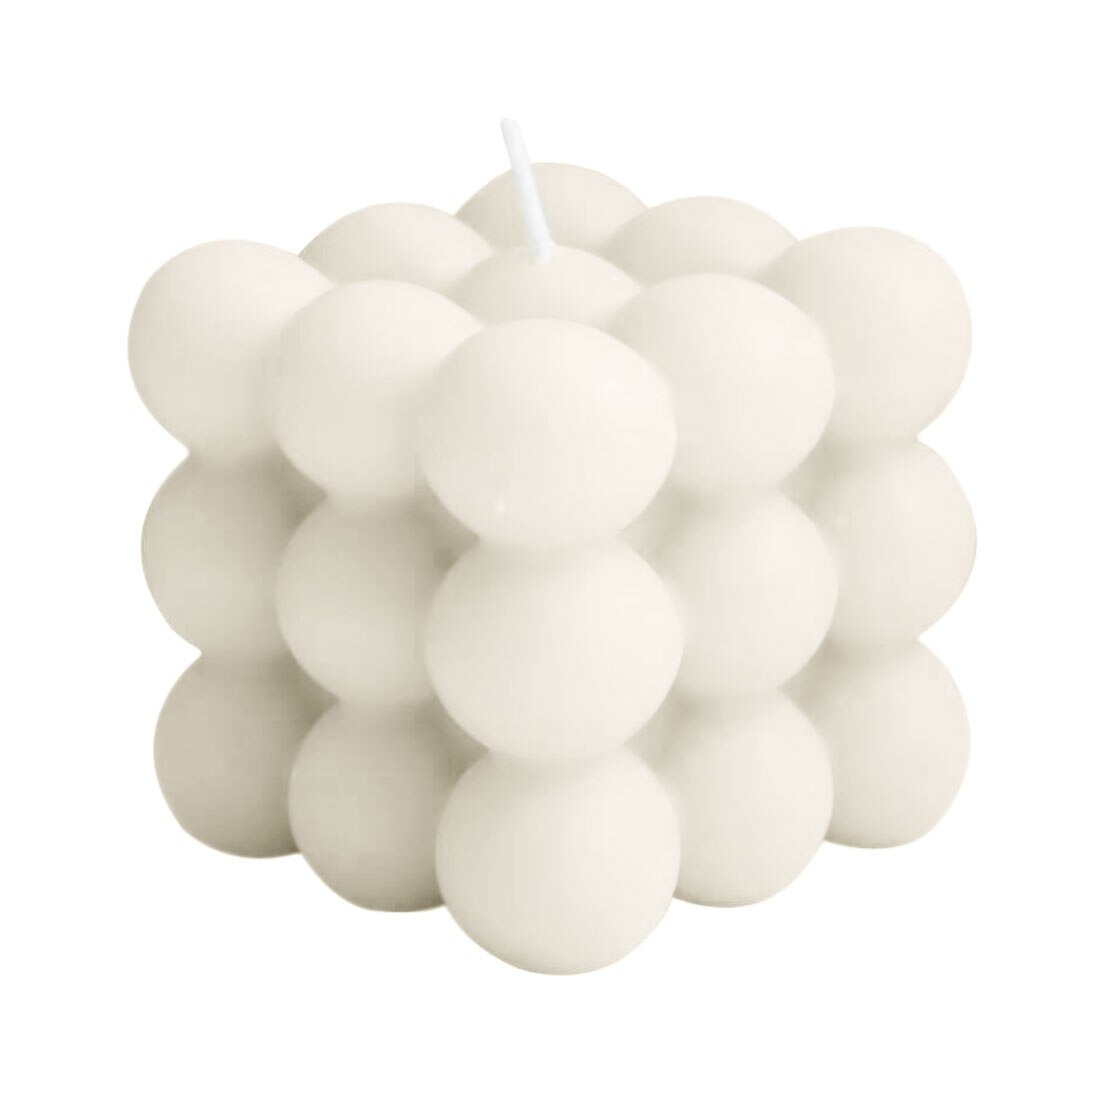 2.1Inch Round Magic Cube Candle scented relaxing Birthday 1PC Soy Wax Aromatherapy Candles Home Party Decoration: White cub